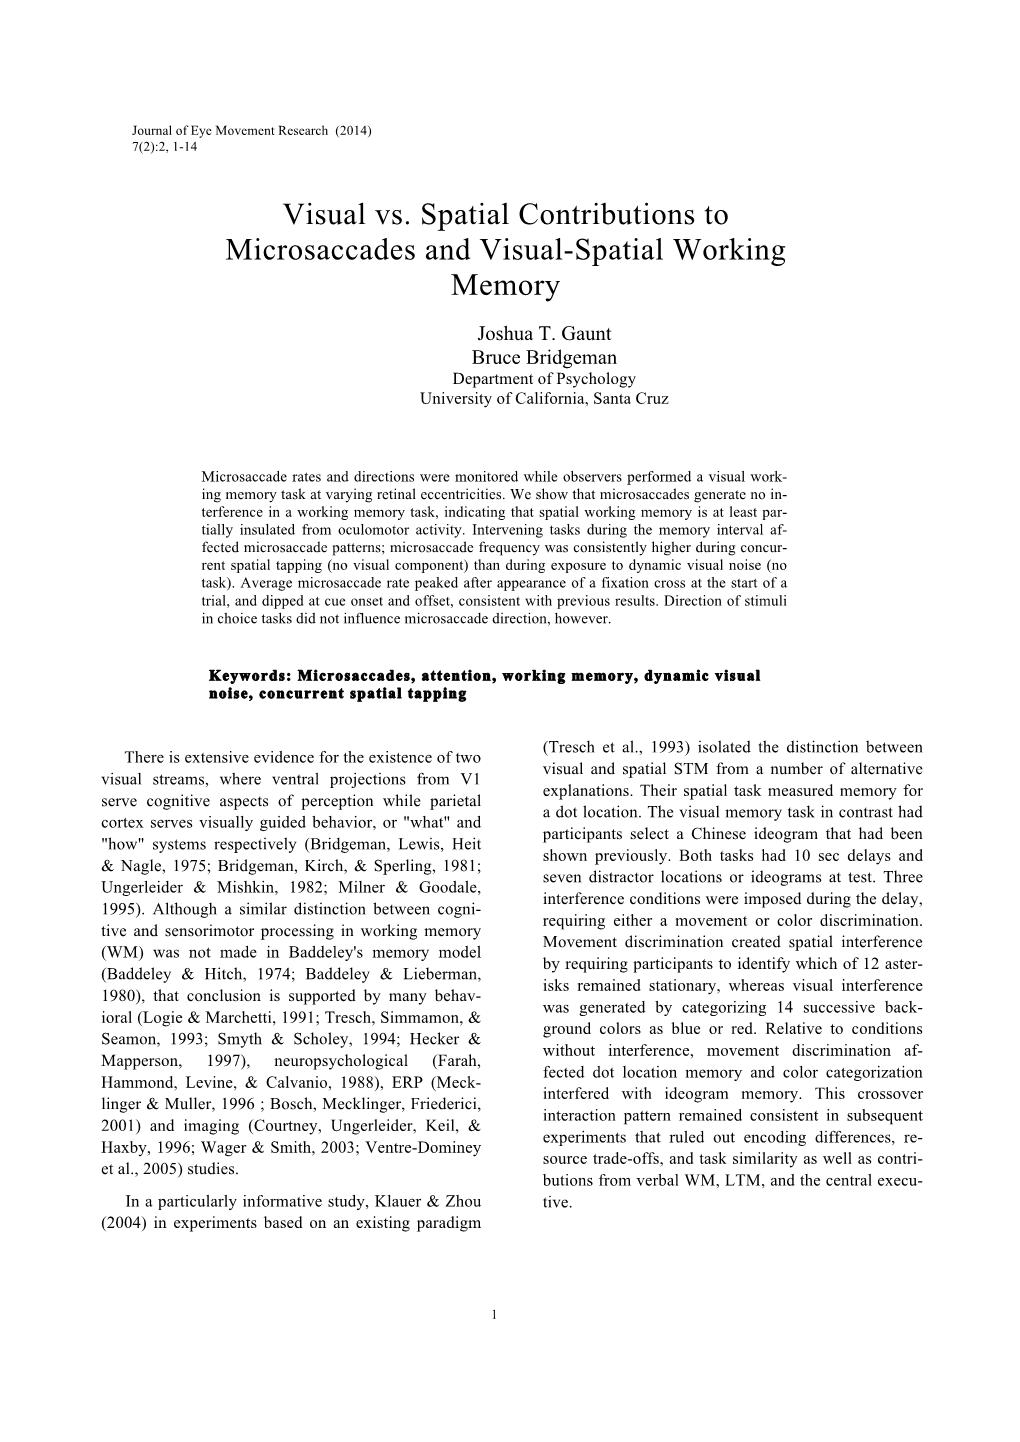 Visual Vs. Spatial Contributions to Microsaccades and Visual-Spatial Working Memory